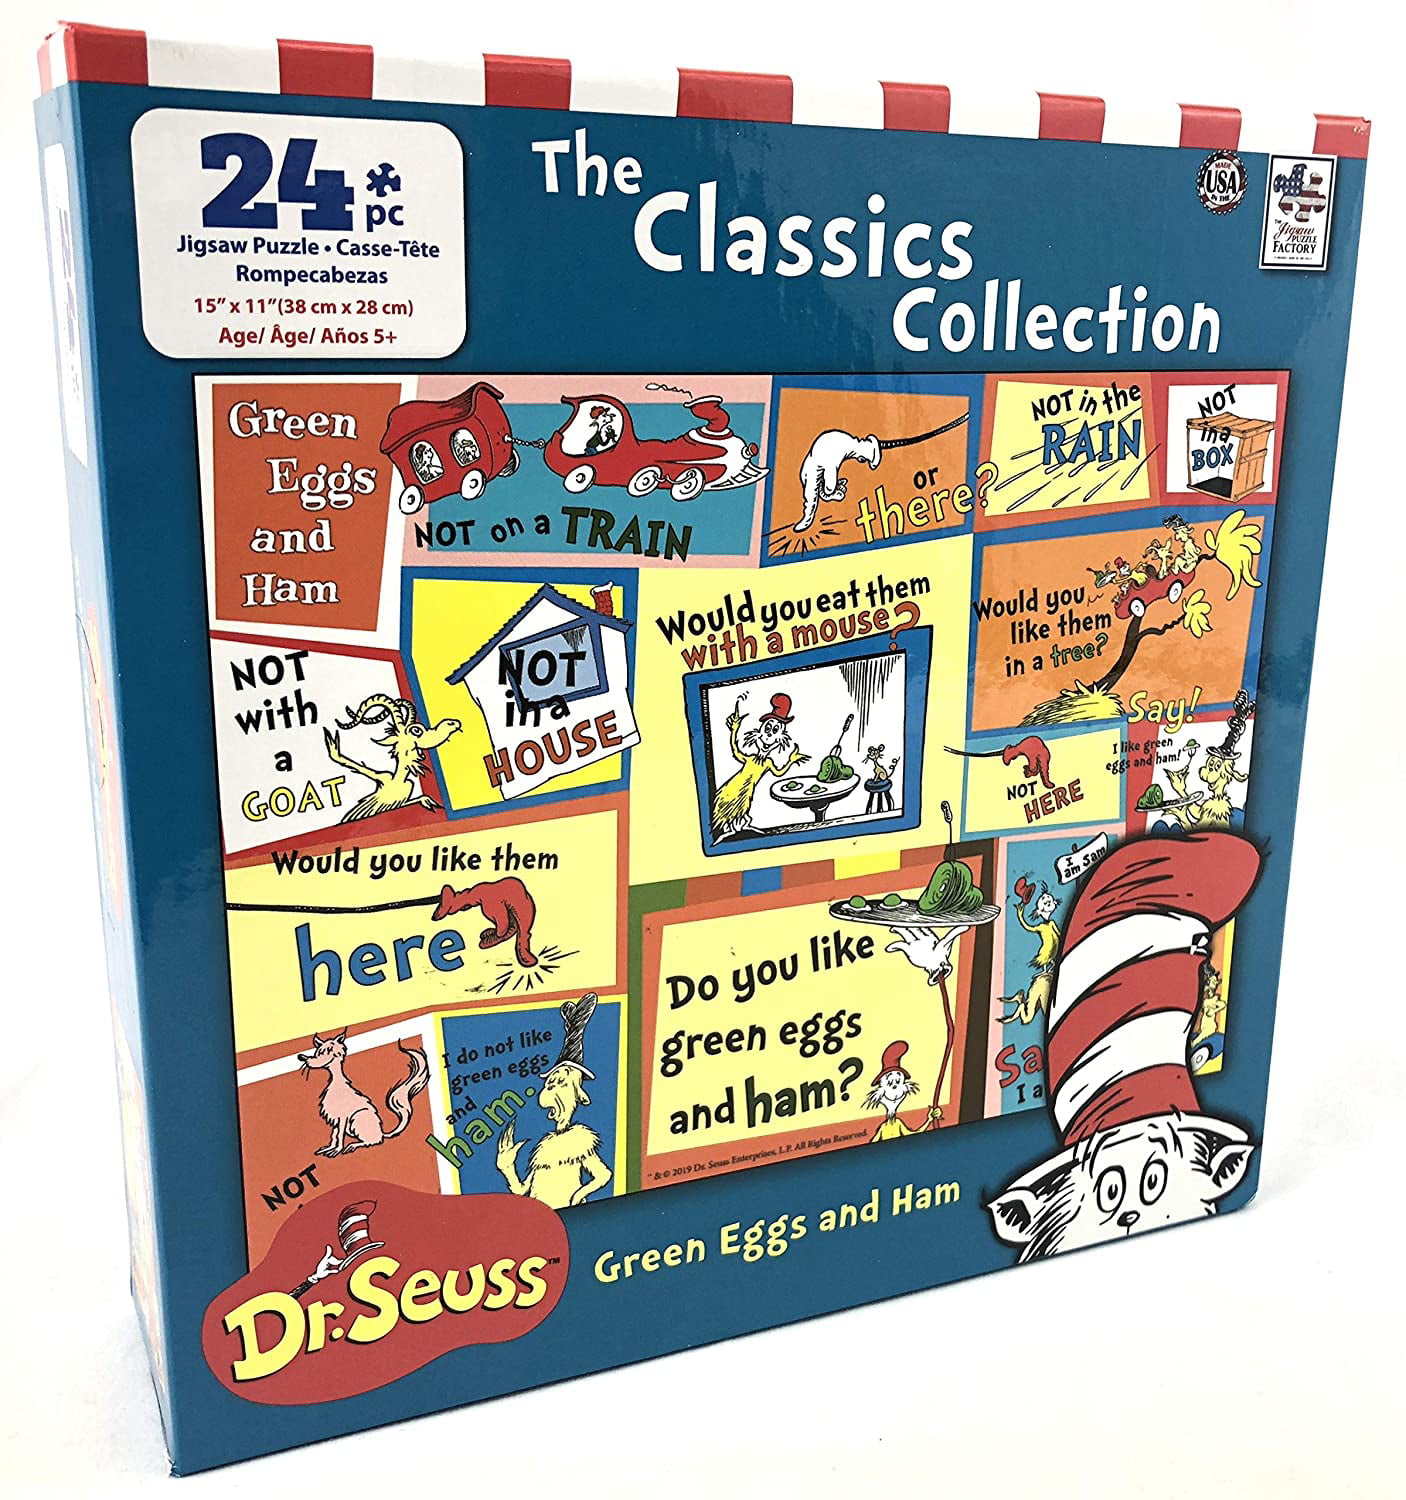 Dr Seuss Jigsaw Puzzle 24 Pieces Green Ham and Eggs Edition 9.1" x 10.3"